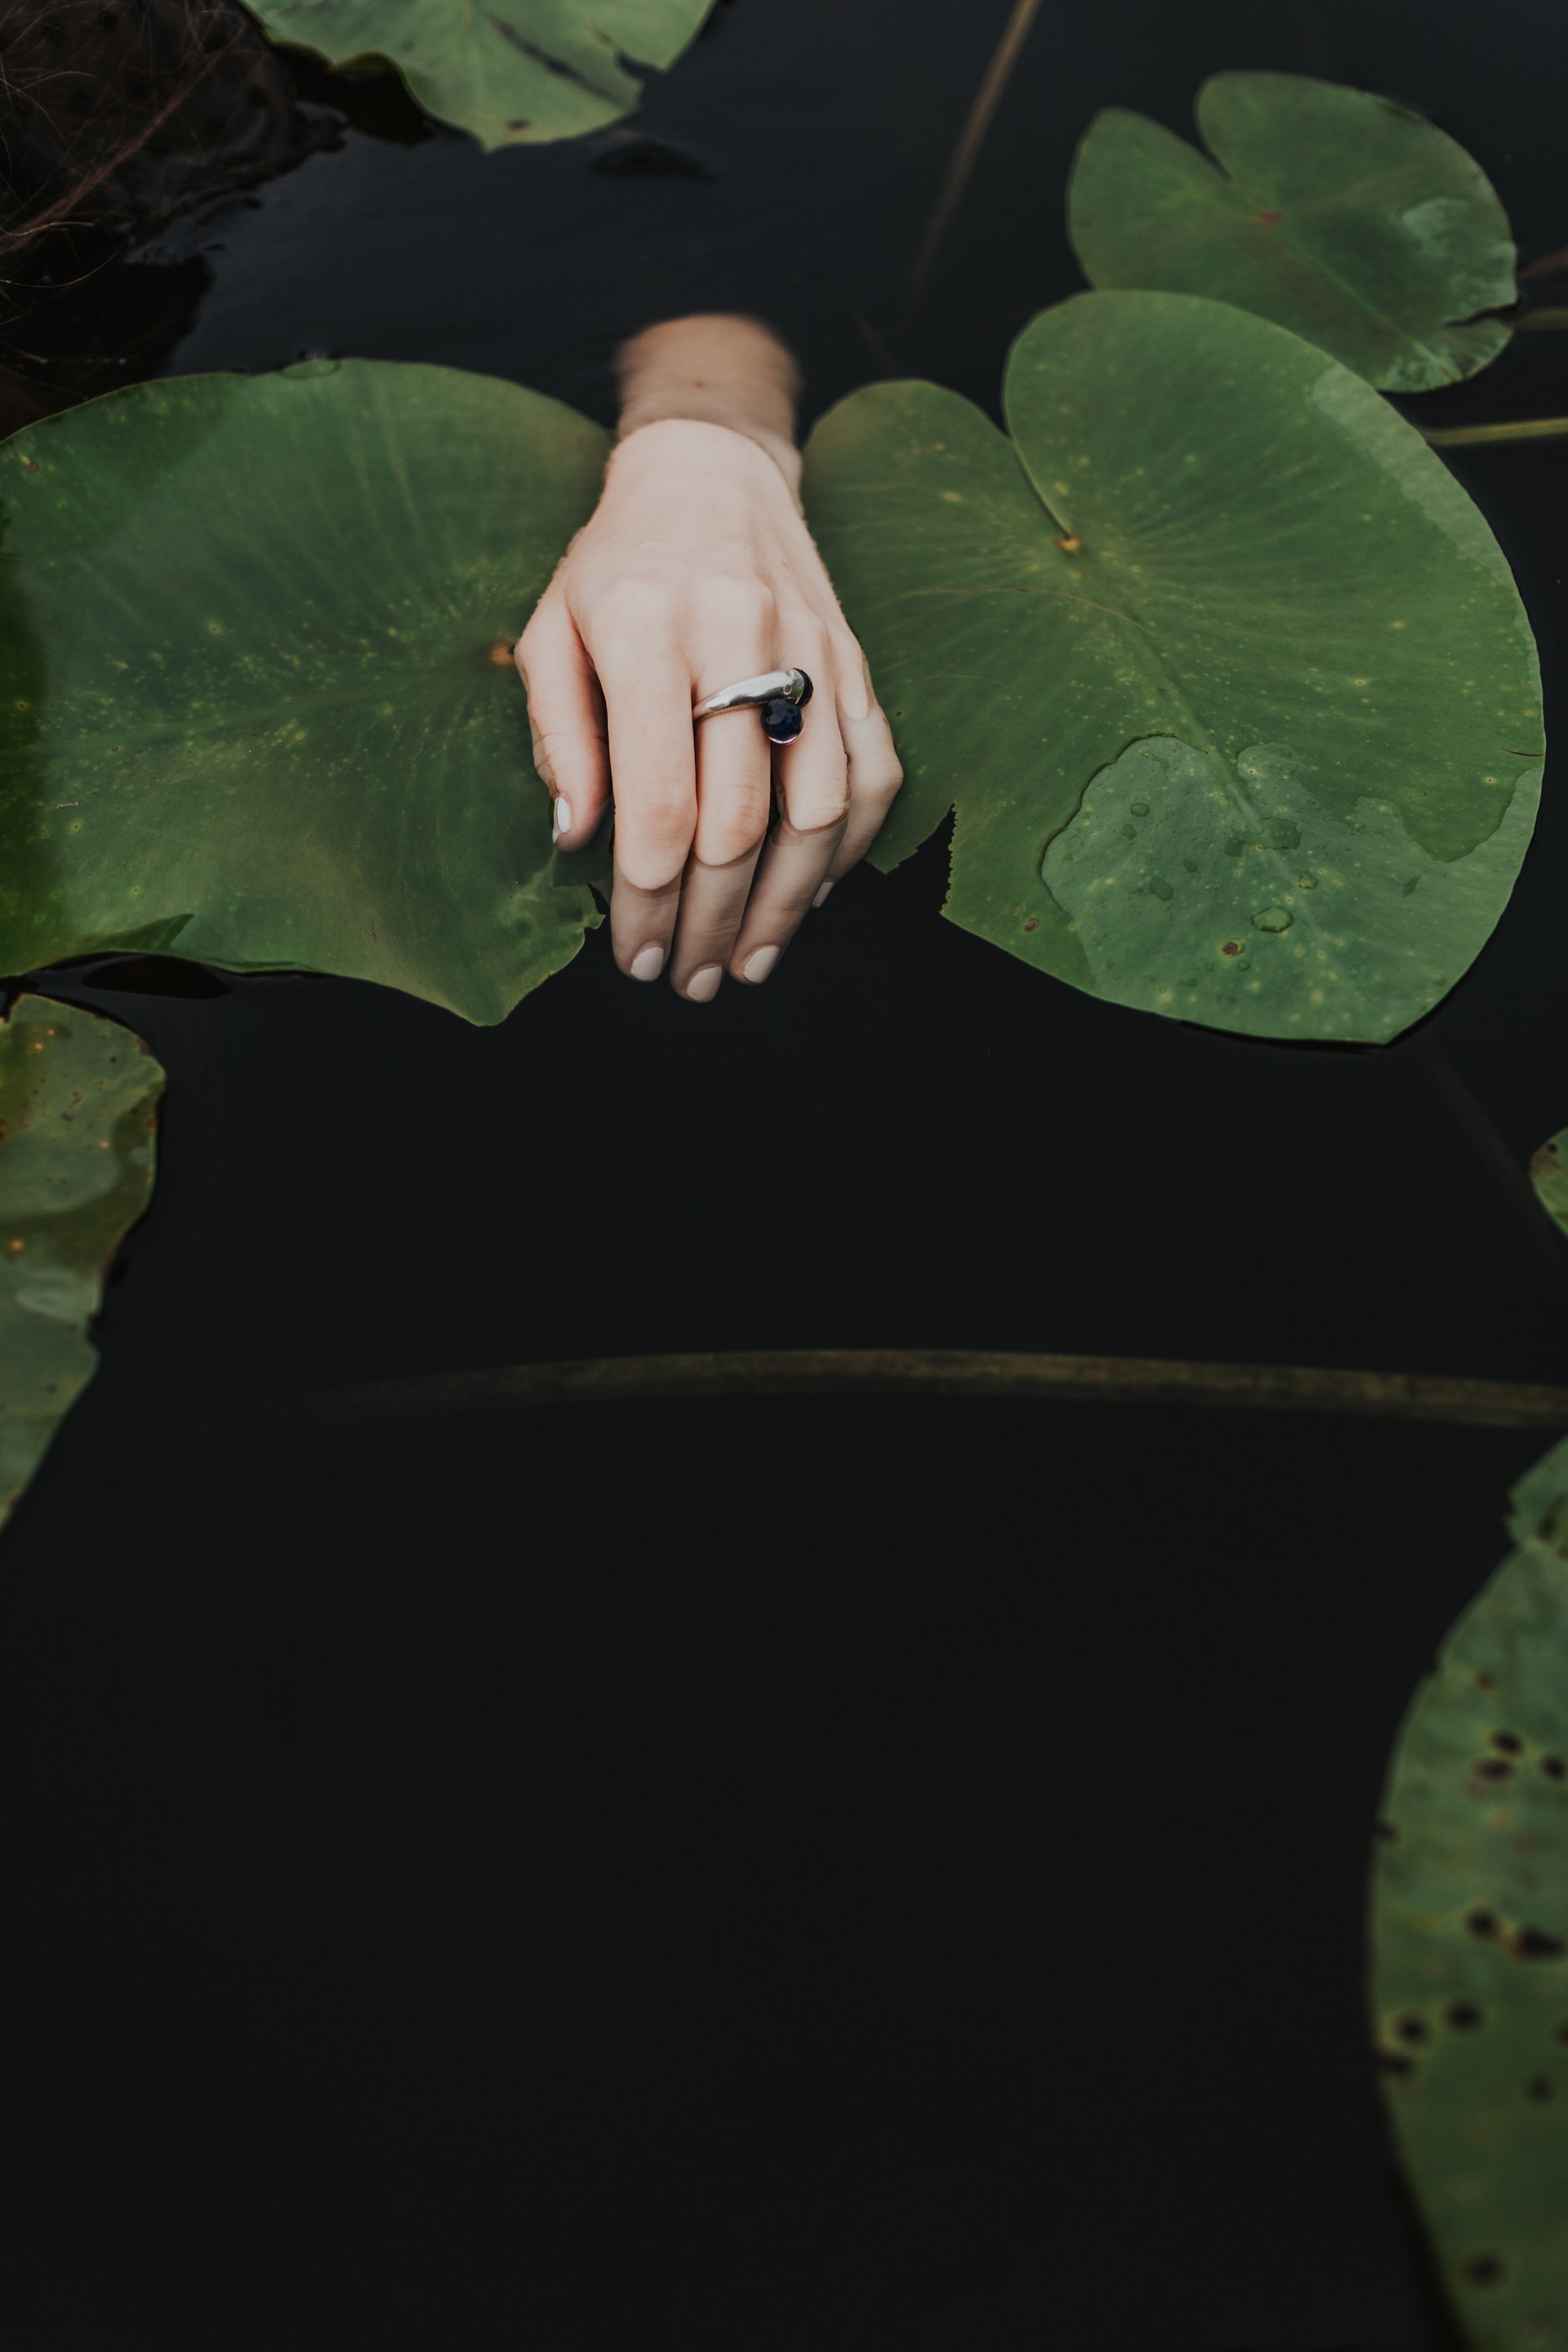 A woman's hand with a ring on her finger floating on green plants in a small pond